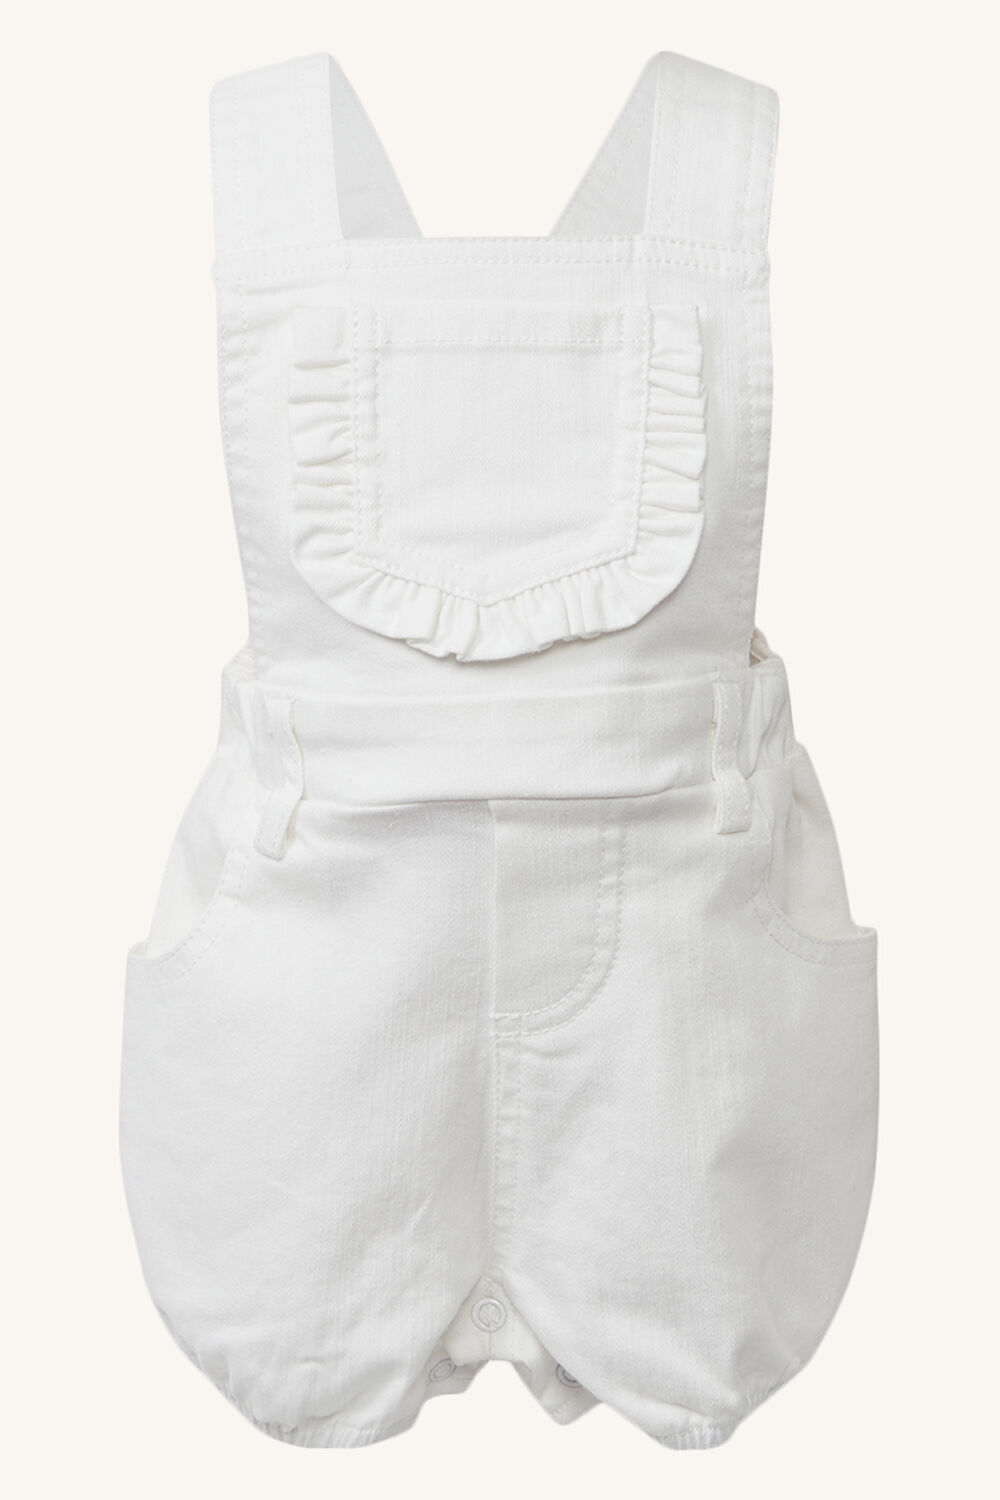 BABY GIRLS BOWIE OVERALL in colour CLOUD DANCER